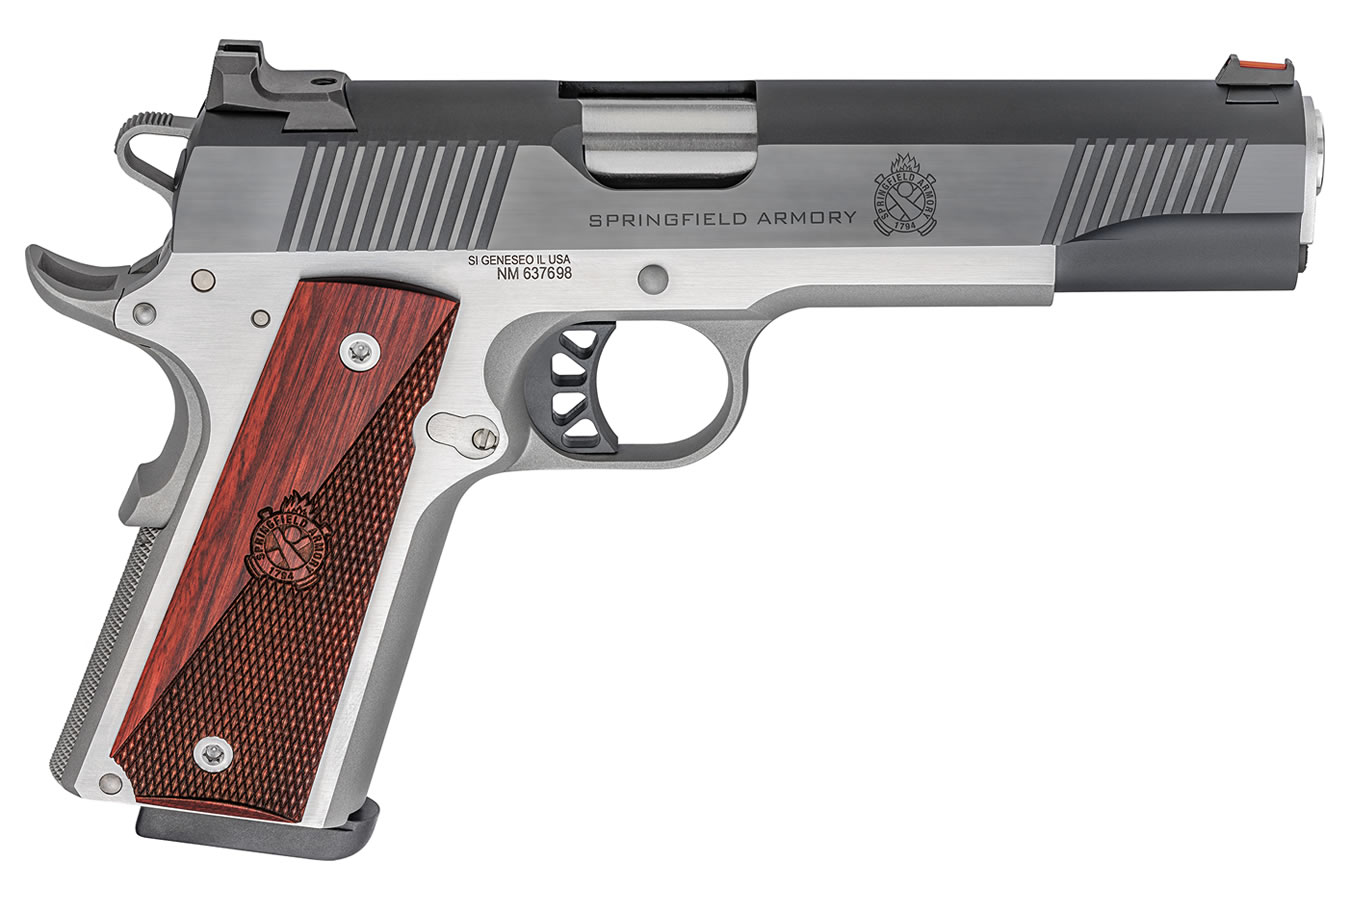 SPRINGFIELD 1911 RONIN OPERATOR 45 ACP FULL-SIZE PISTOL WITH WOOD LAMINATE GRIPS (LE)